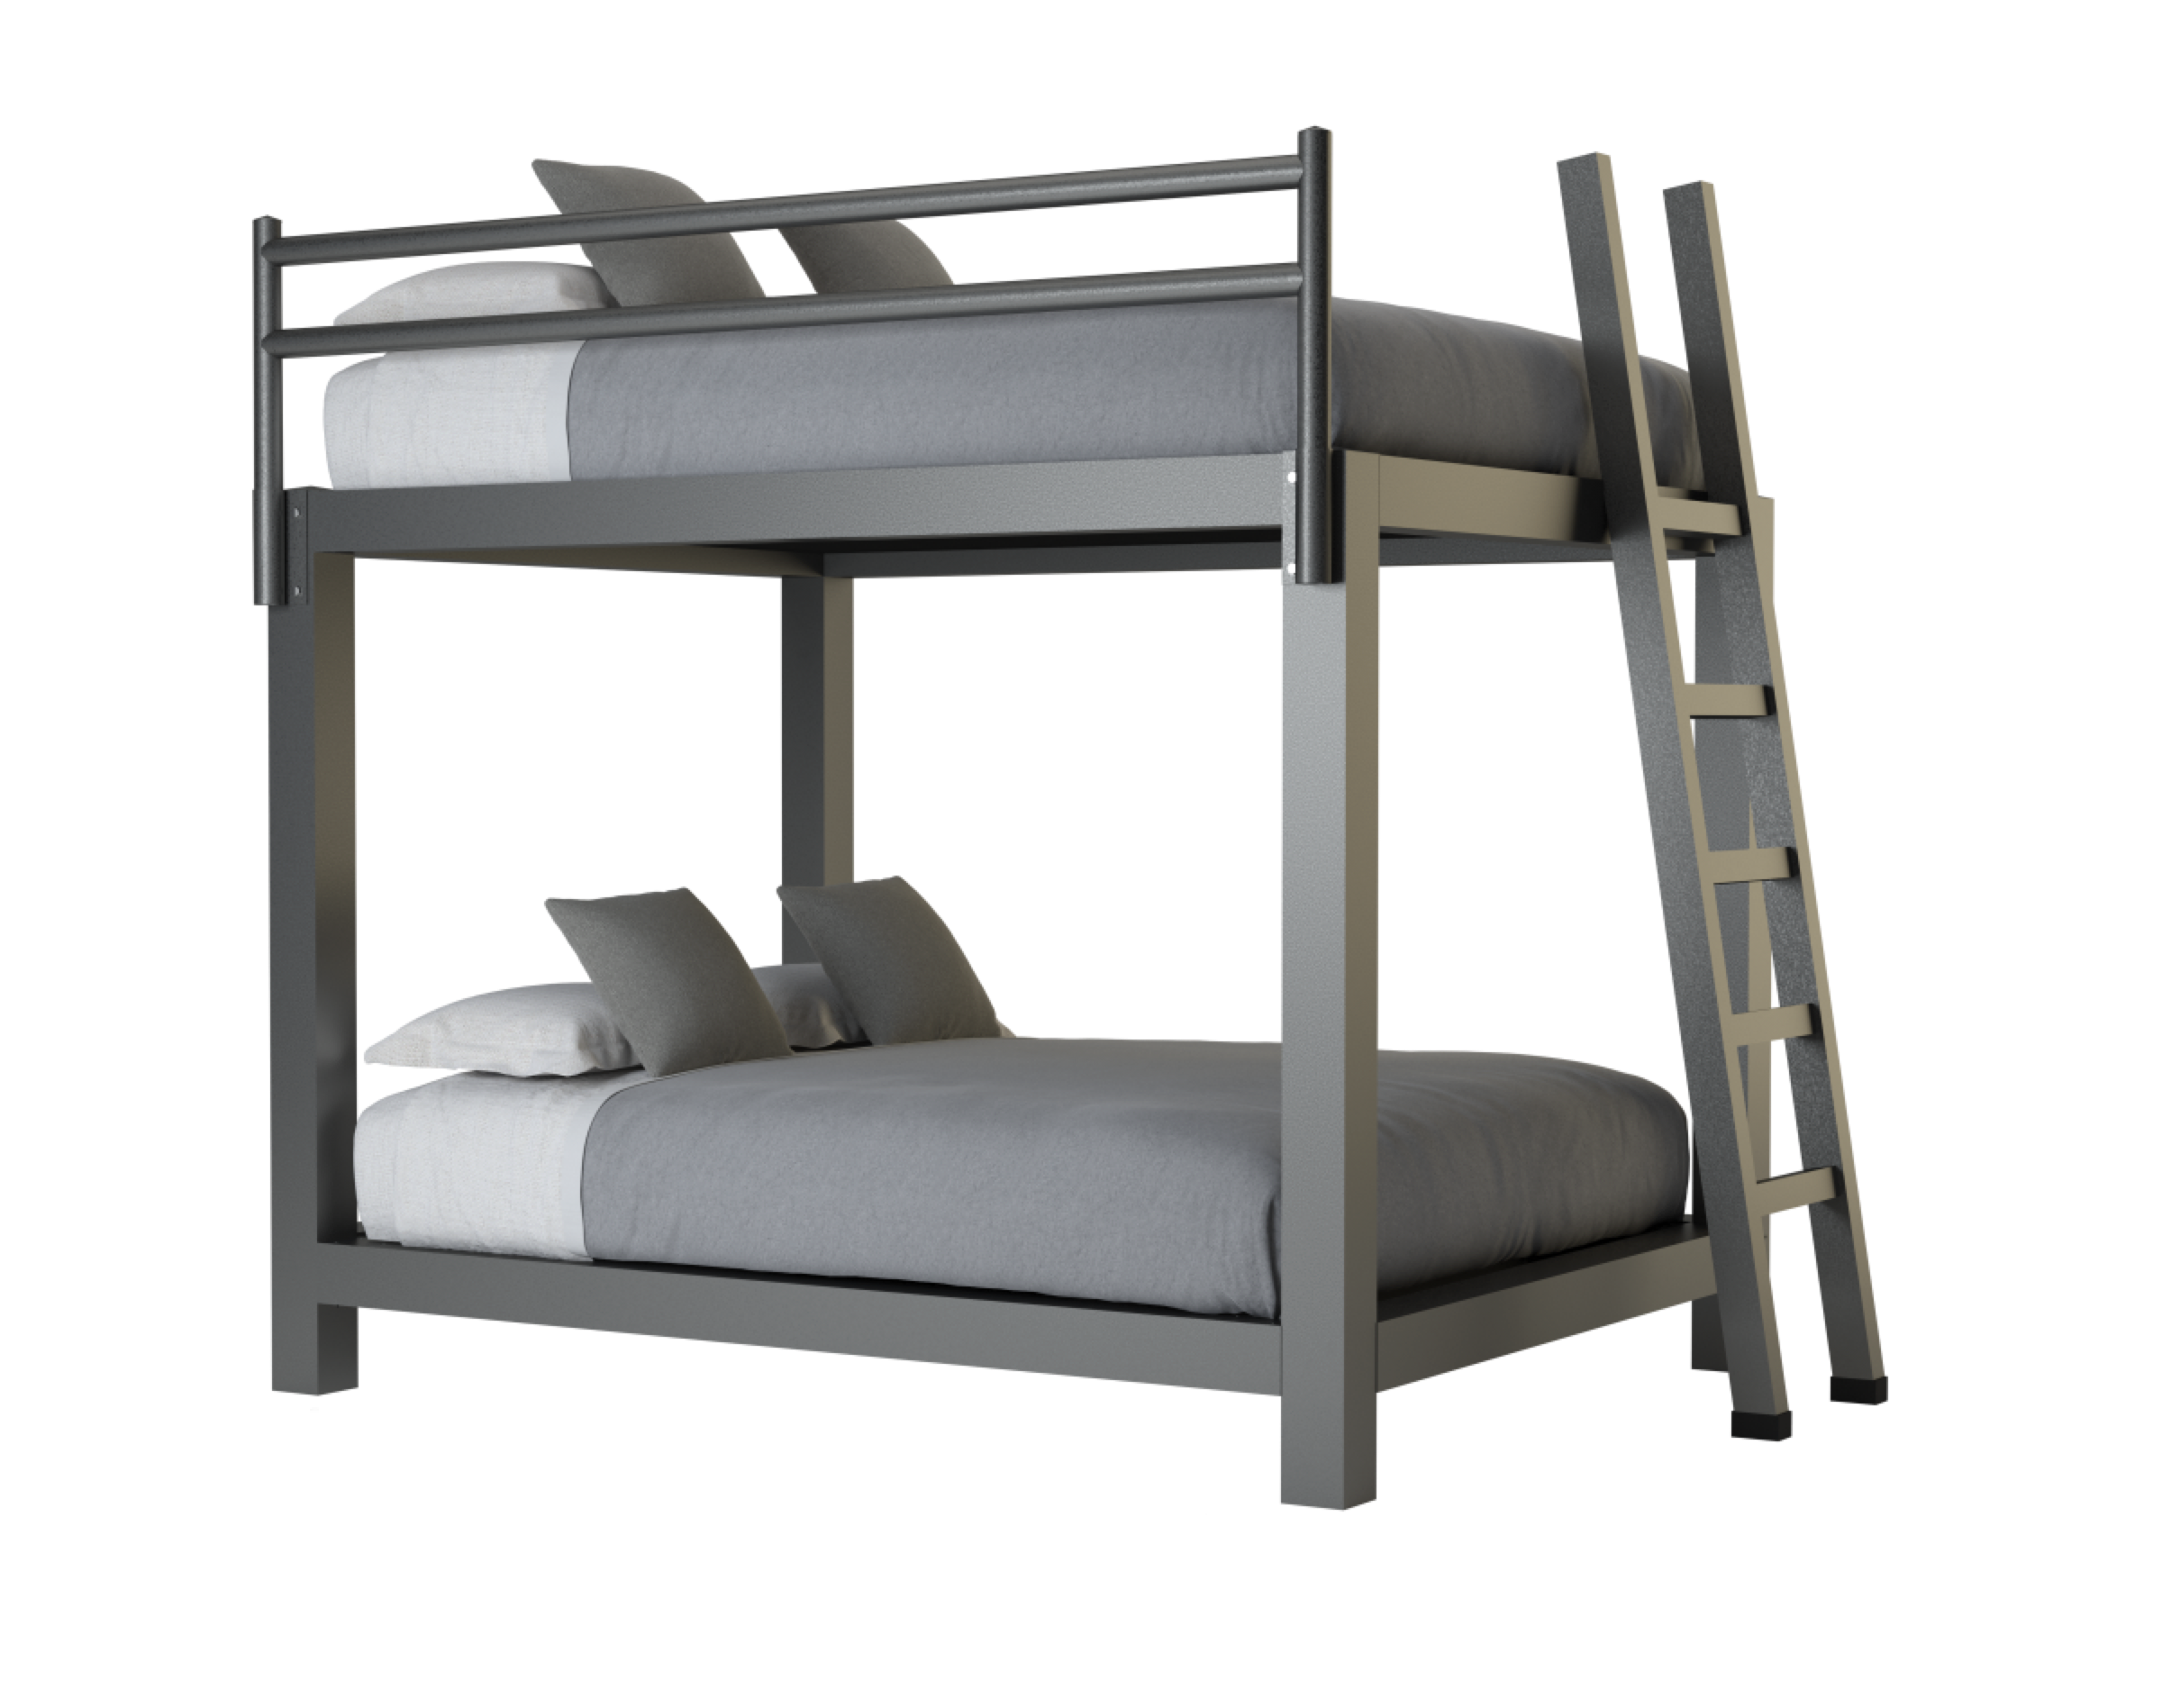 Queen Over Bunk Bed, Can I Use A Regular Mattress On Bunk Bed